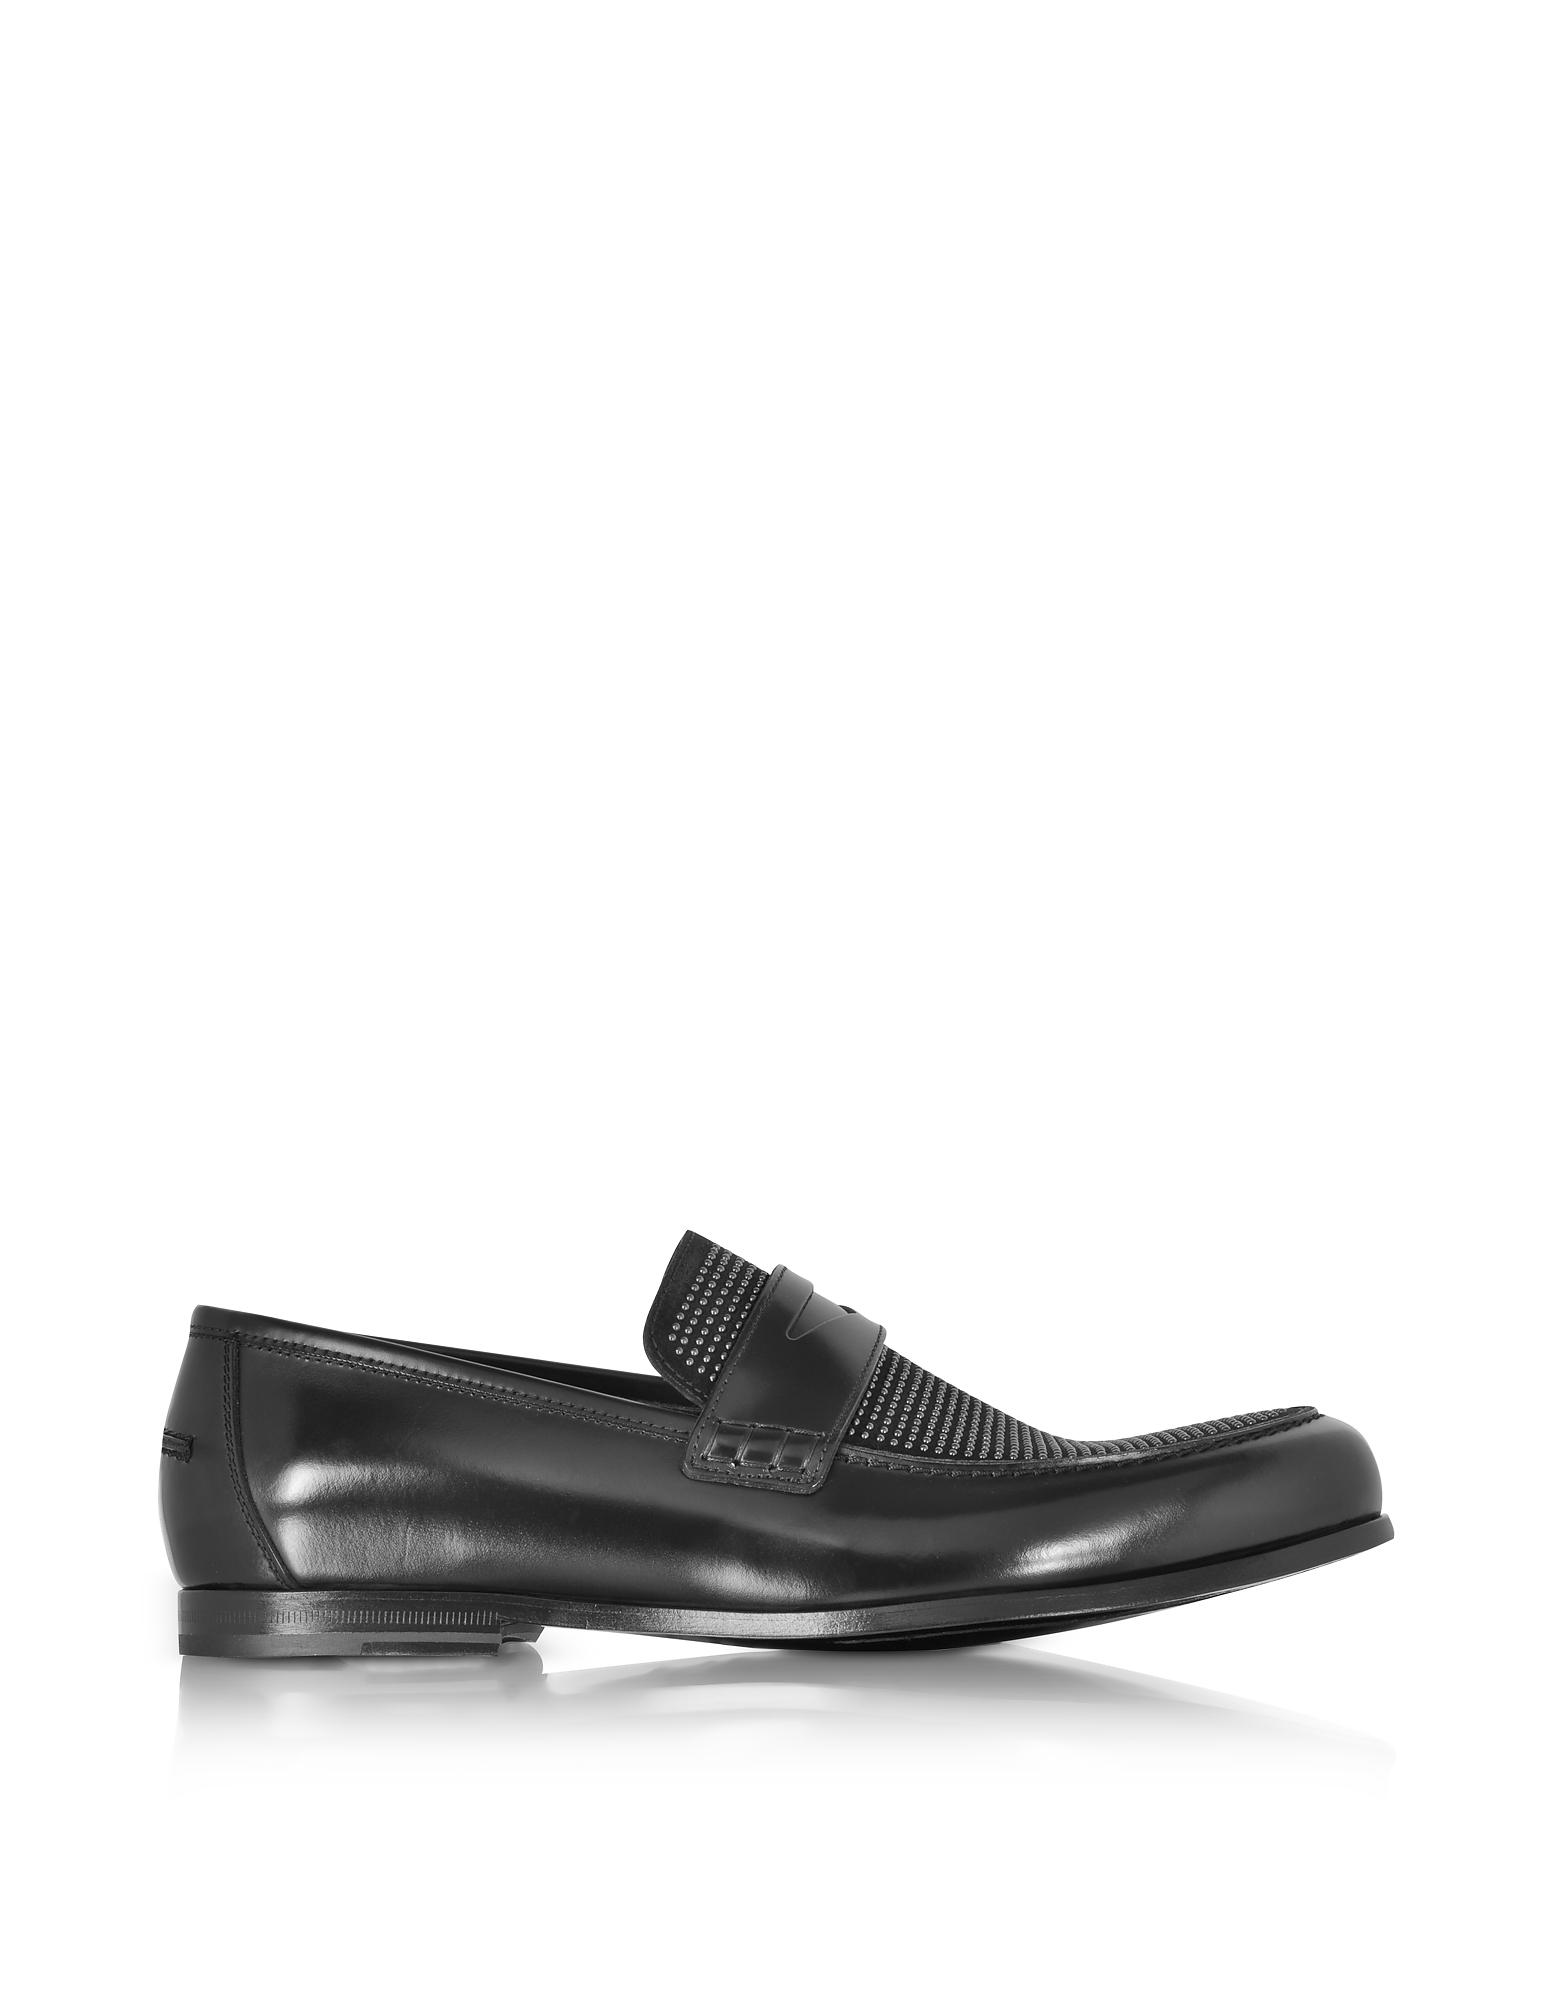 Lyst - Jimmy Choo Darblay Shiny Black Leather And Suede Loafers W/studs ...